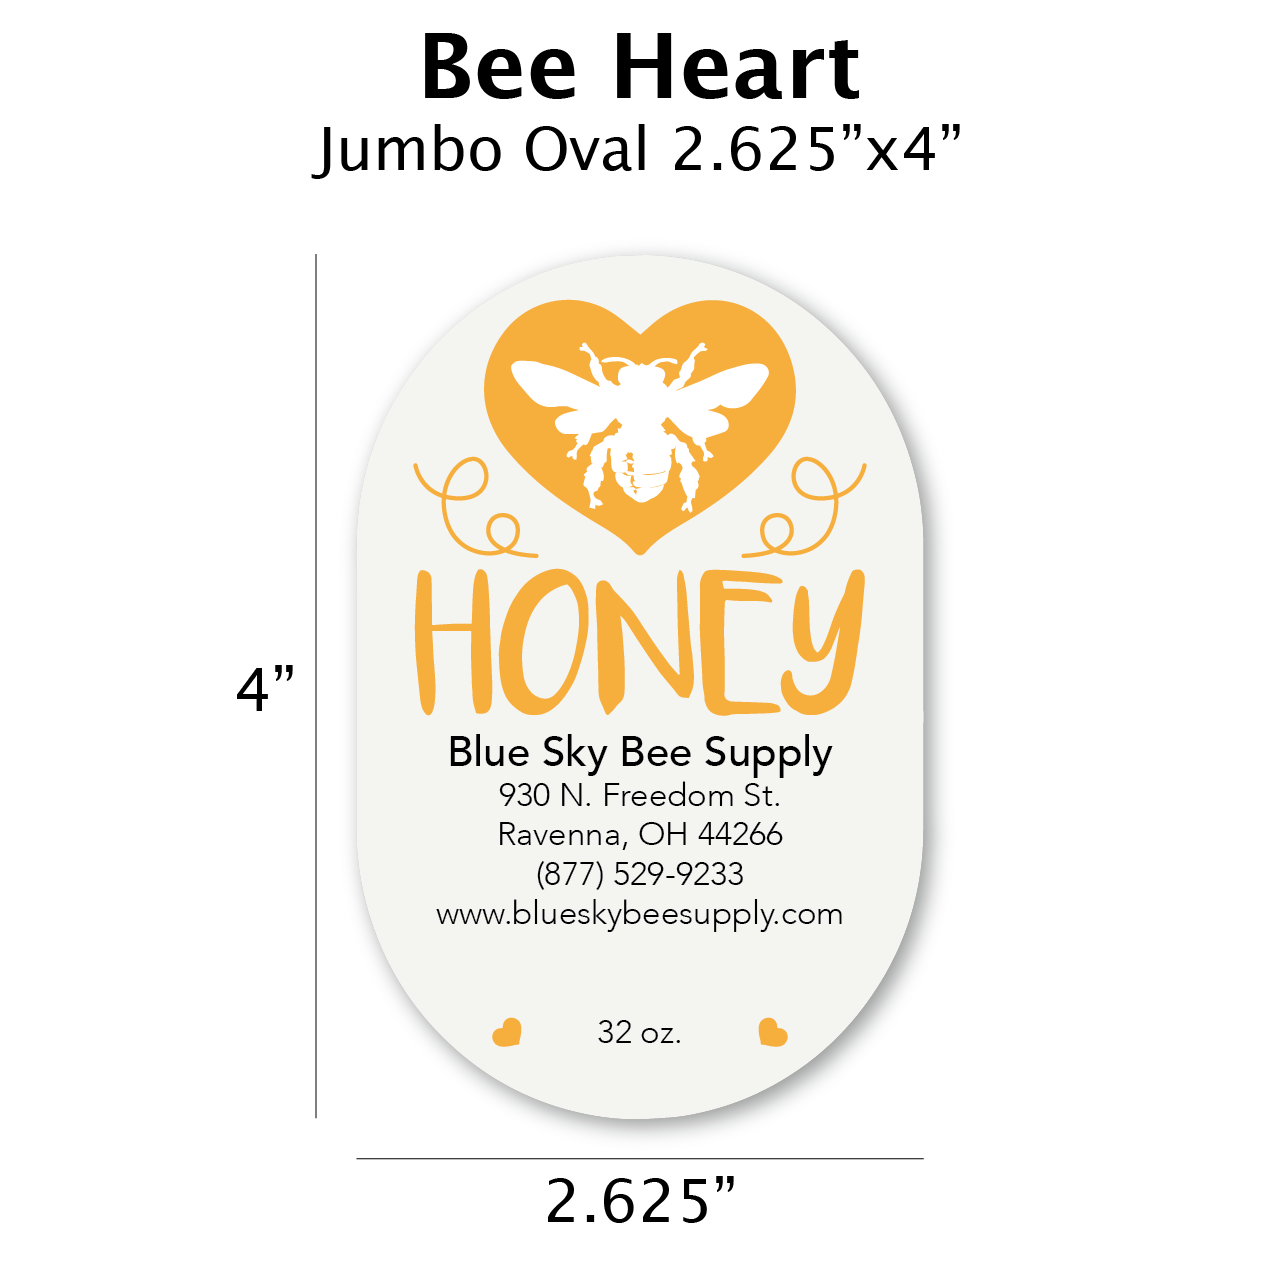 https://cdn11.bigcommerce.com/s-fx4fw18j2i/images/stencil/1280x1280/products/1317/2472/Graphics_Labels_Website_Image_Bee_Heart_Jumbo_Oval__13754.1664378948.png?c=1&imbypass=on